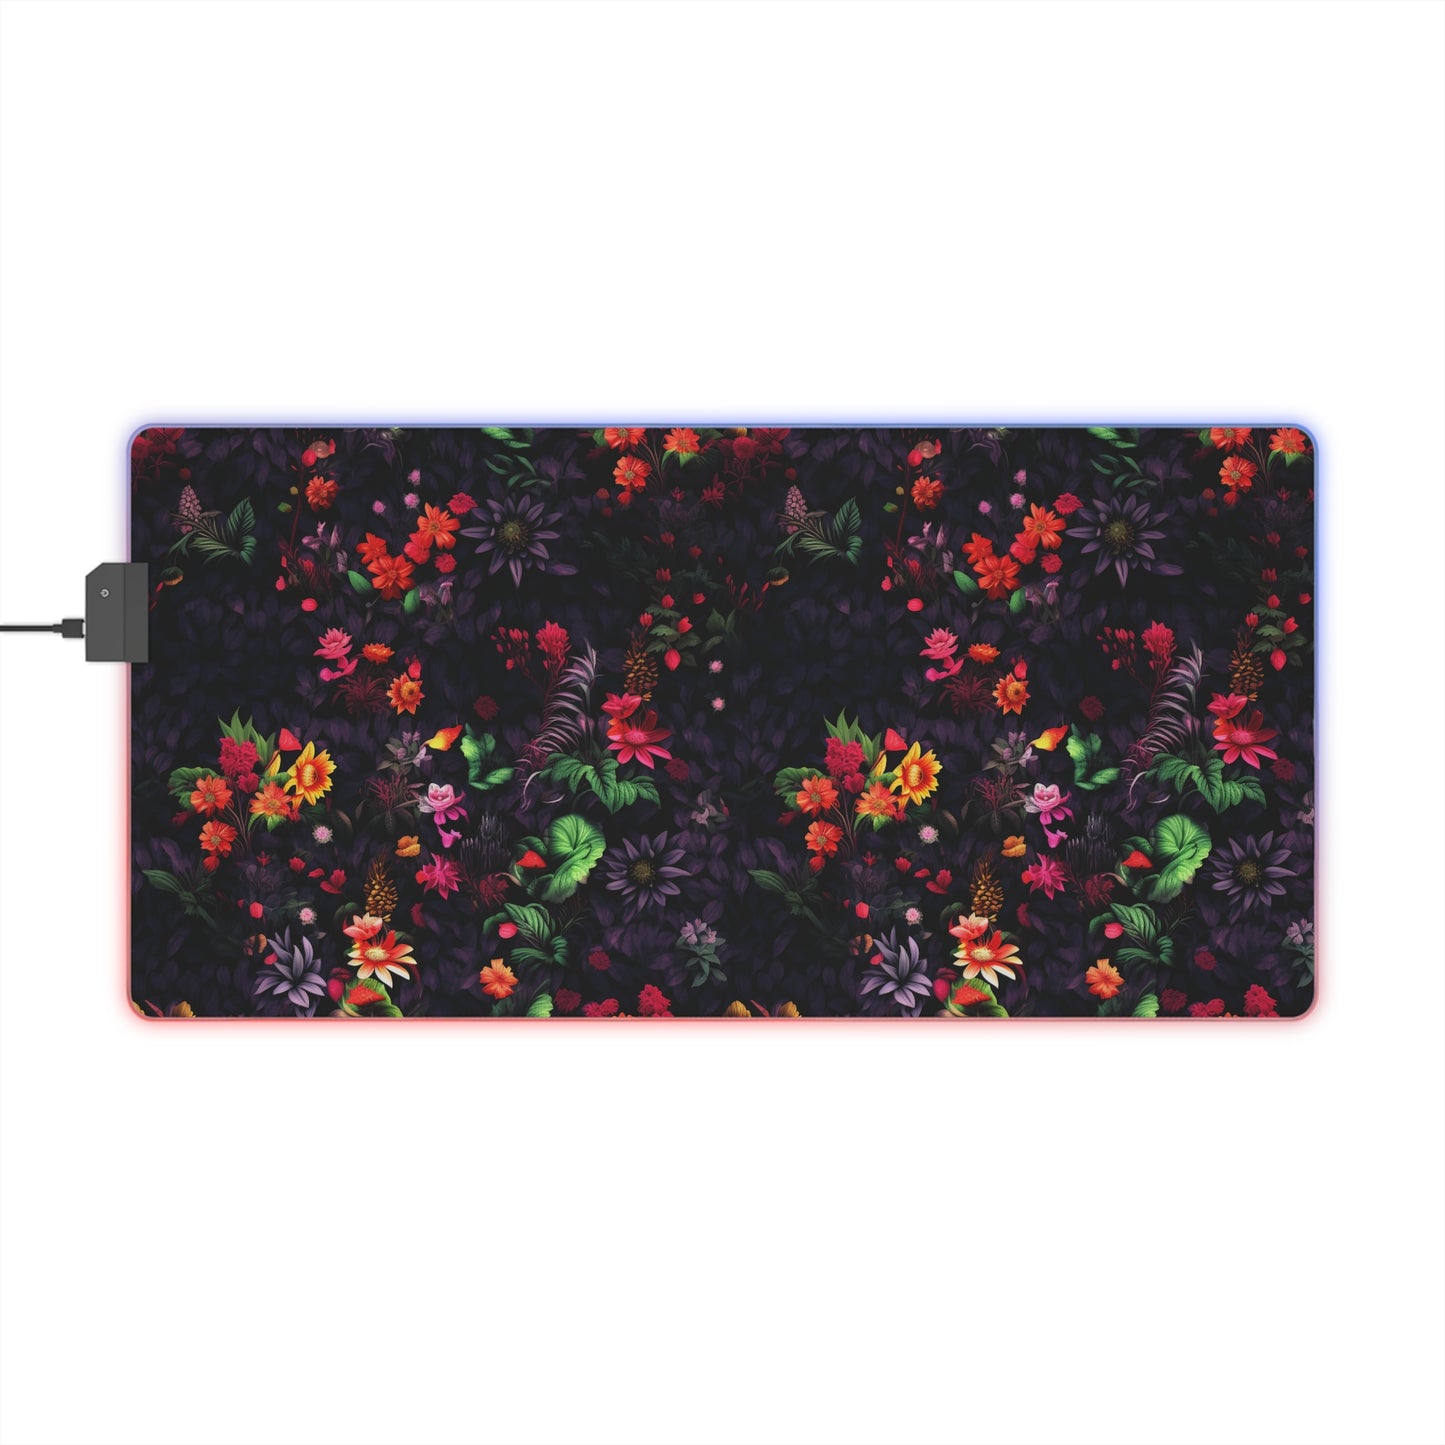 Neduz Designs Artified LED Gaming Mouse Pad with Floral Print - High Precision and Dynamic Lighting